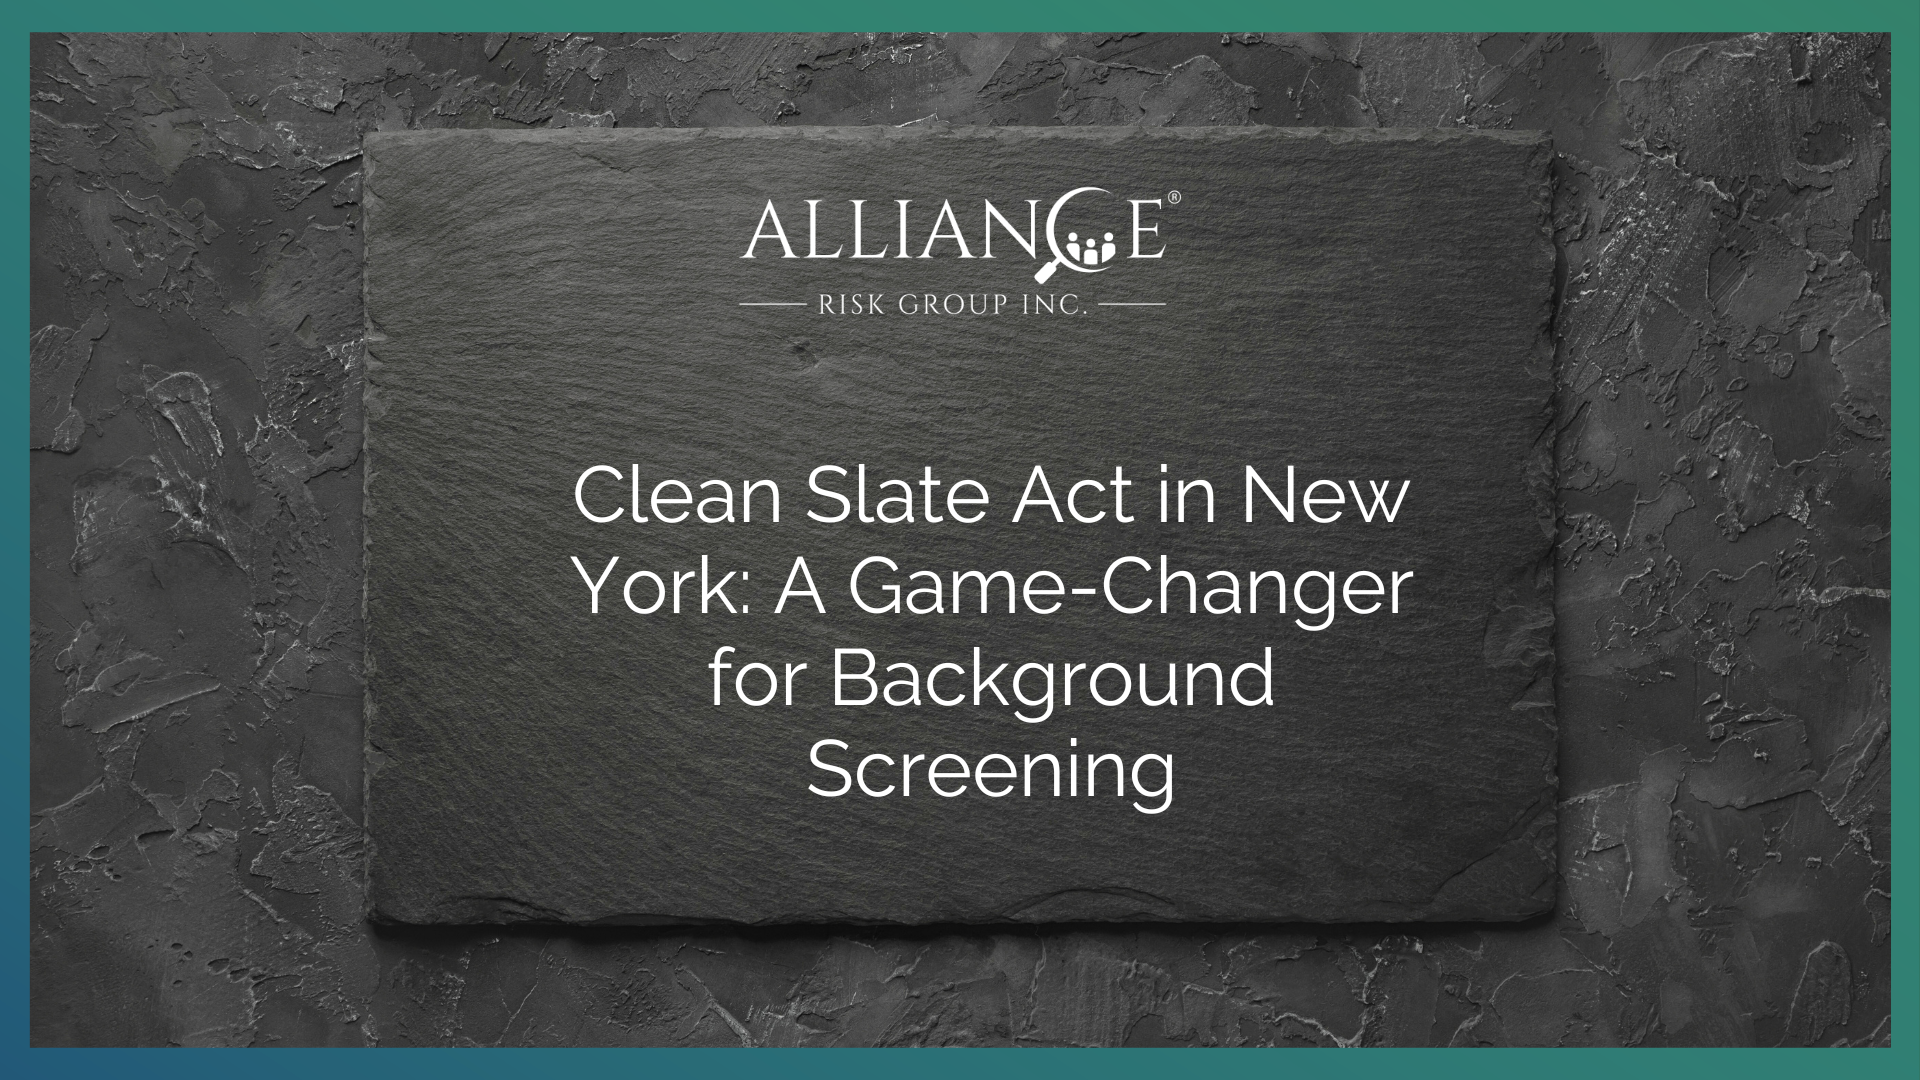 Clean Slate Act: 6 Key Facts To Help Clear Confusion - Alliance Risk Group,  Inc. ®